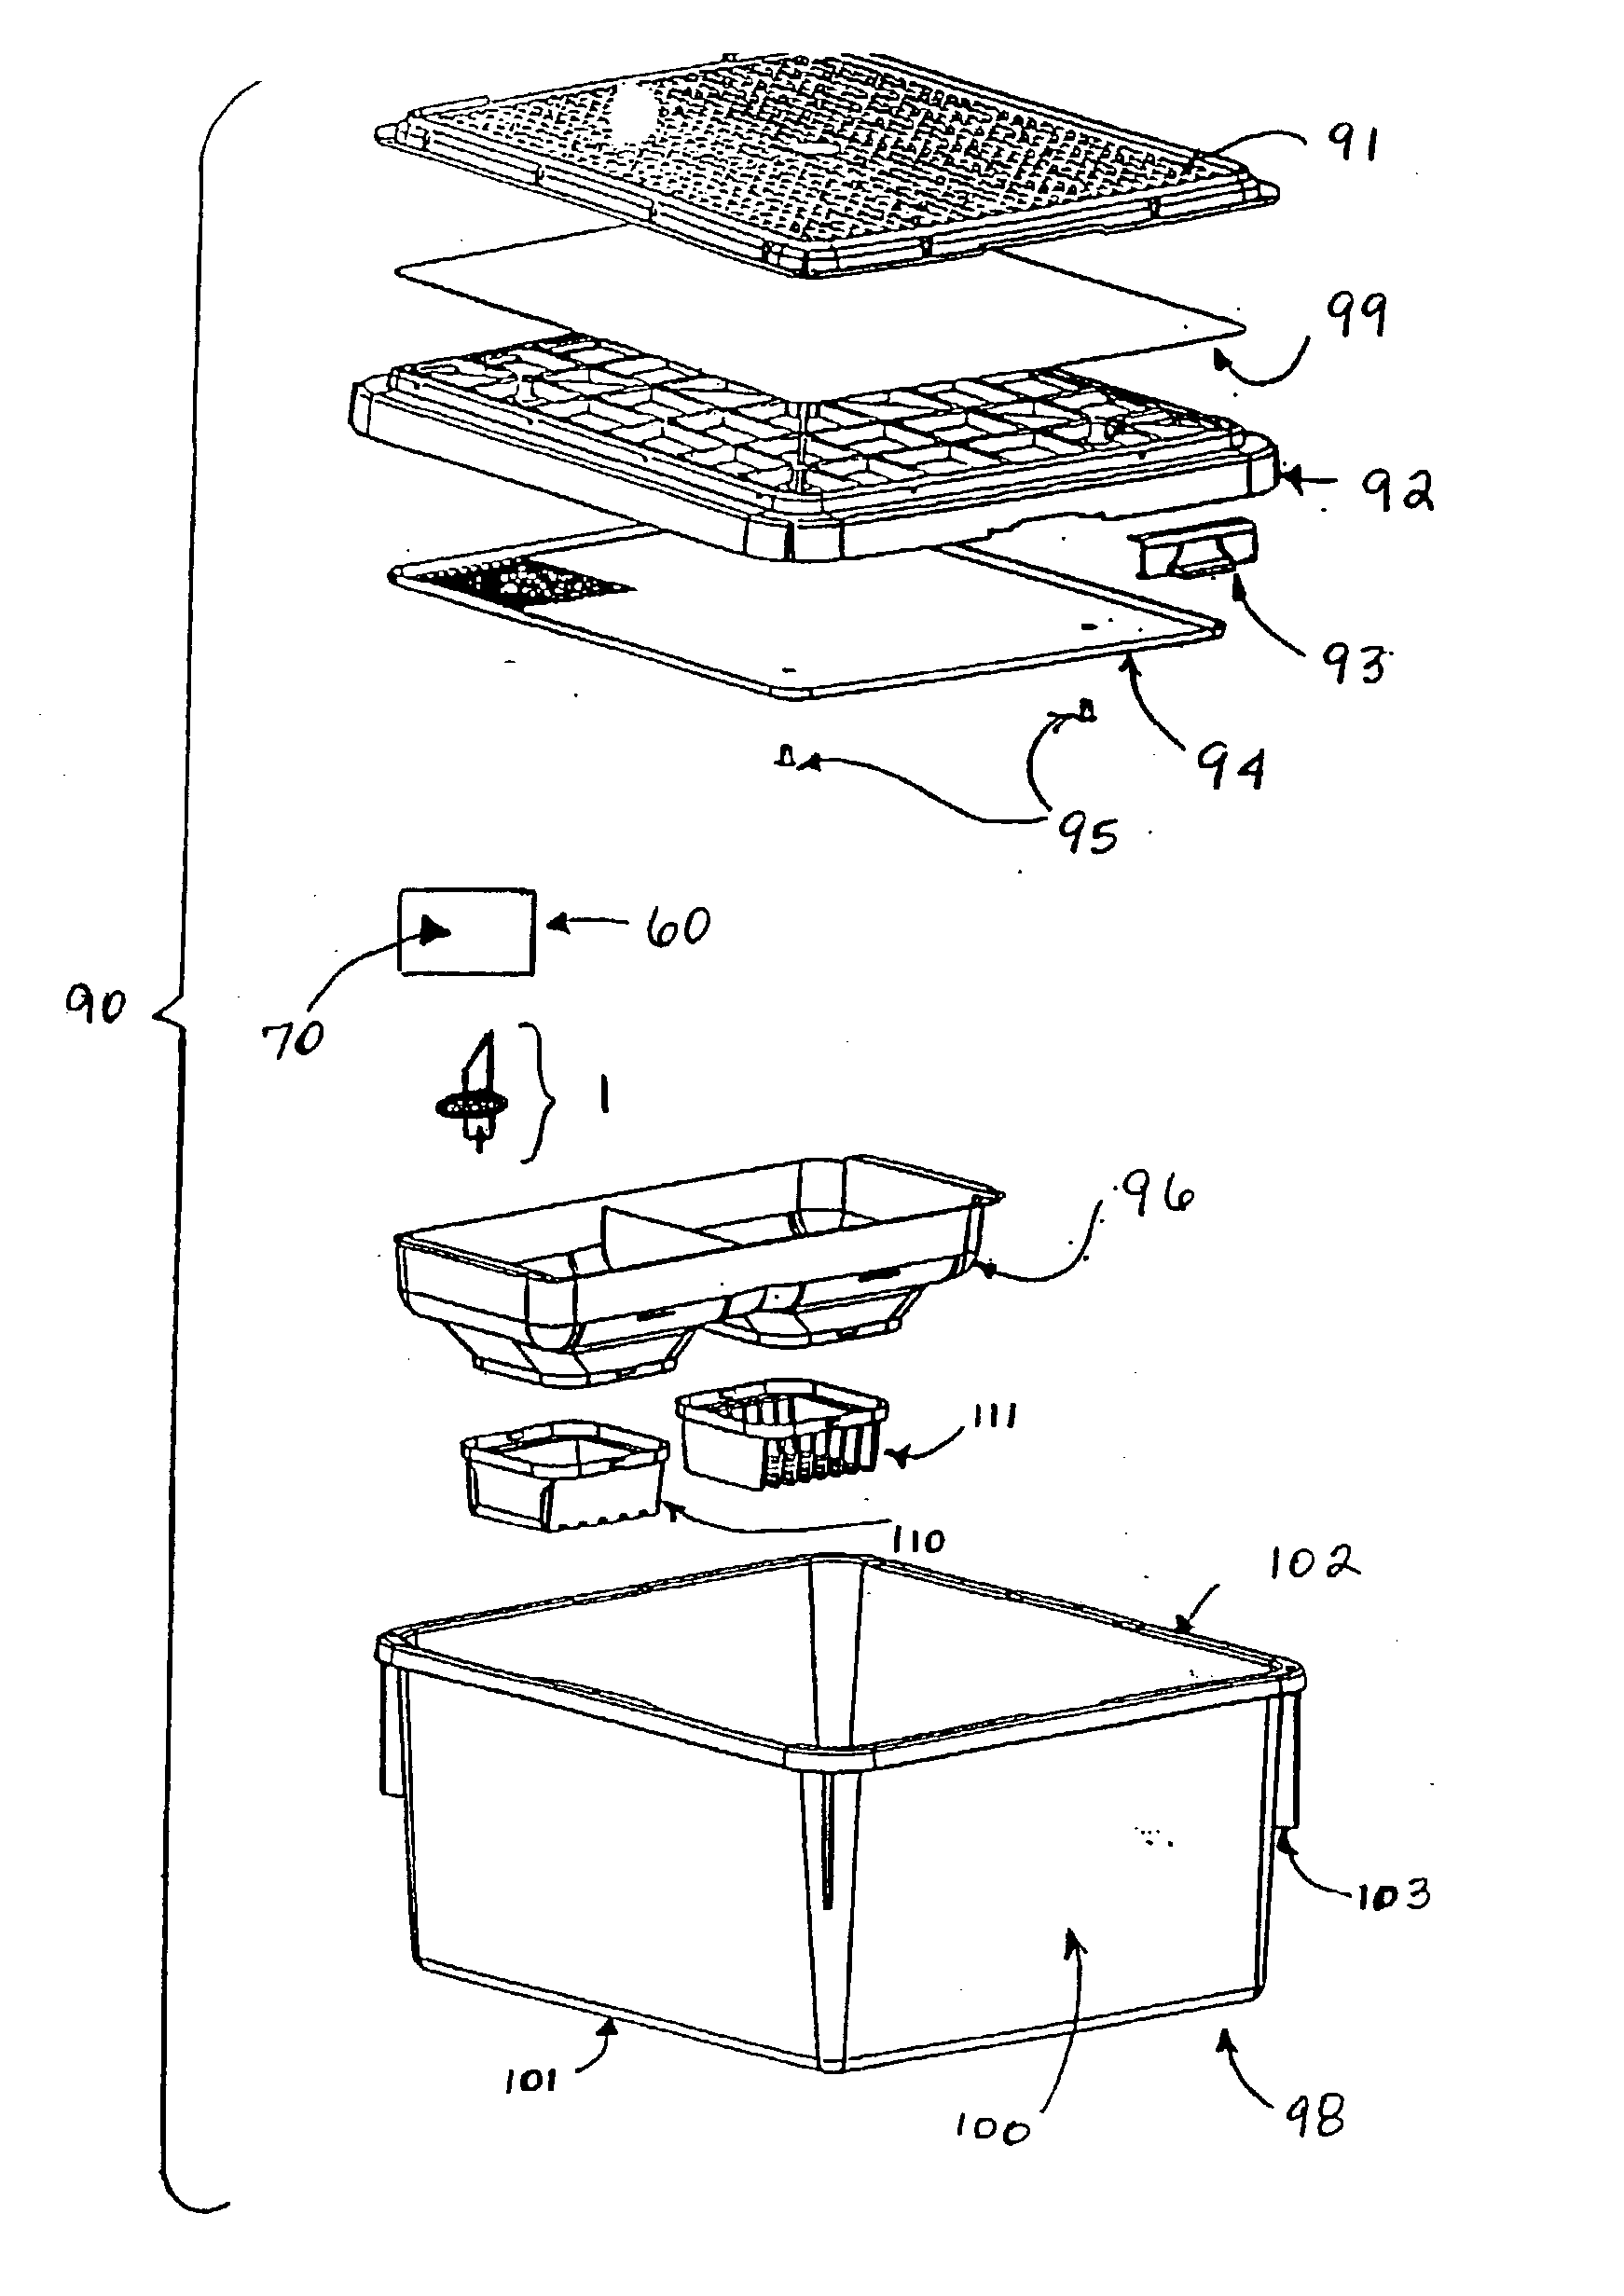 Fluid delivery system